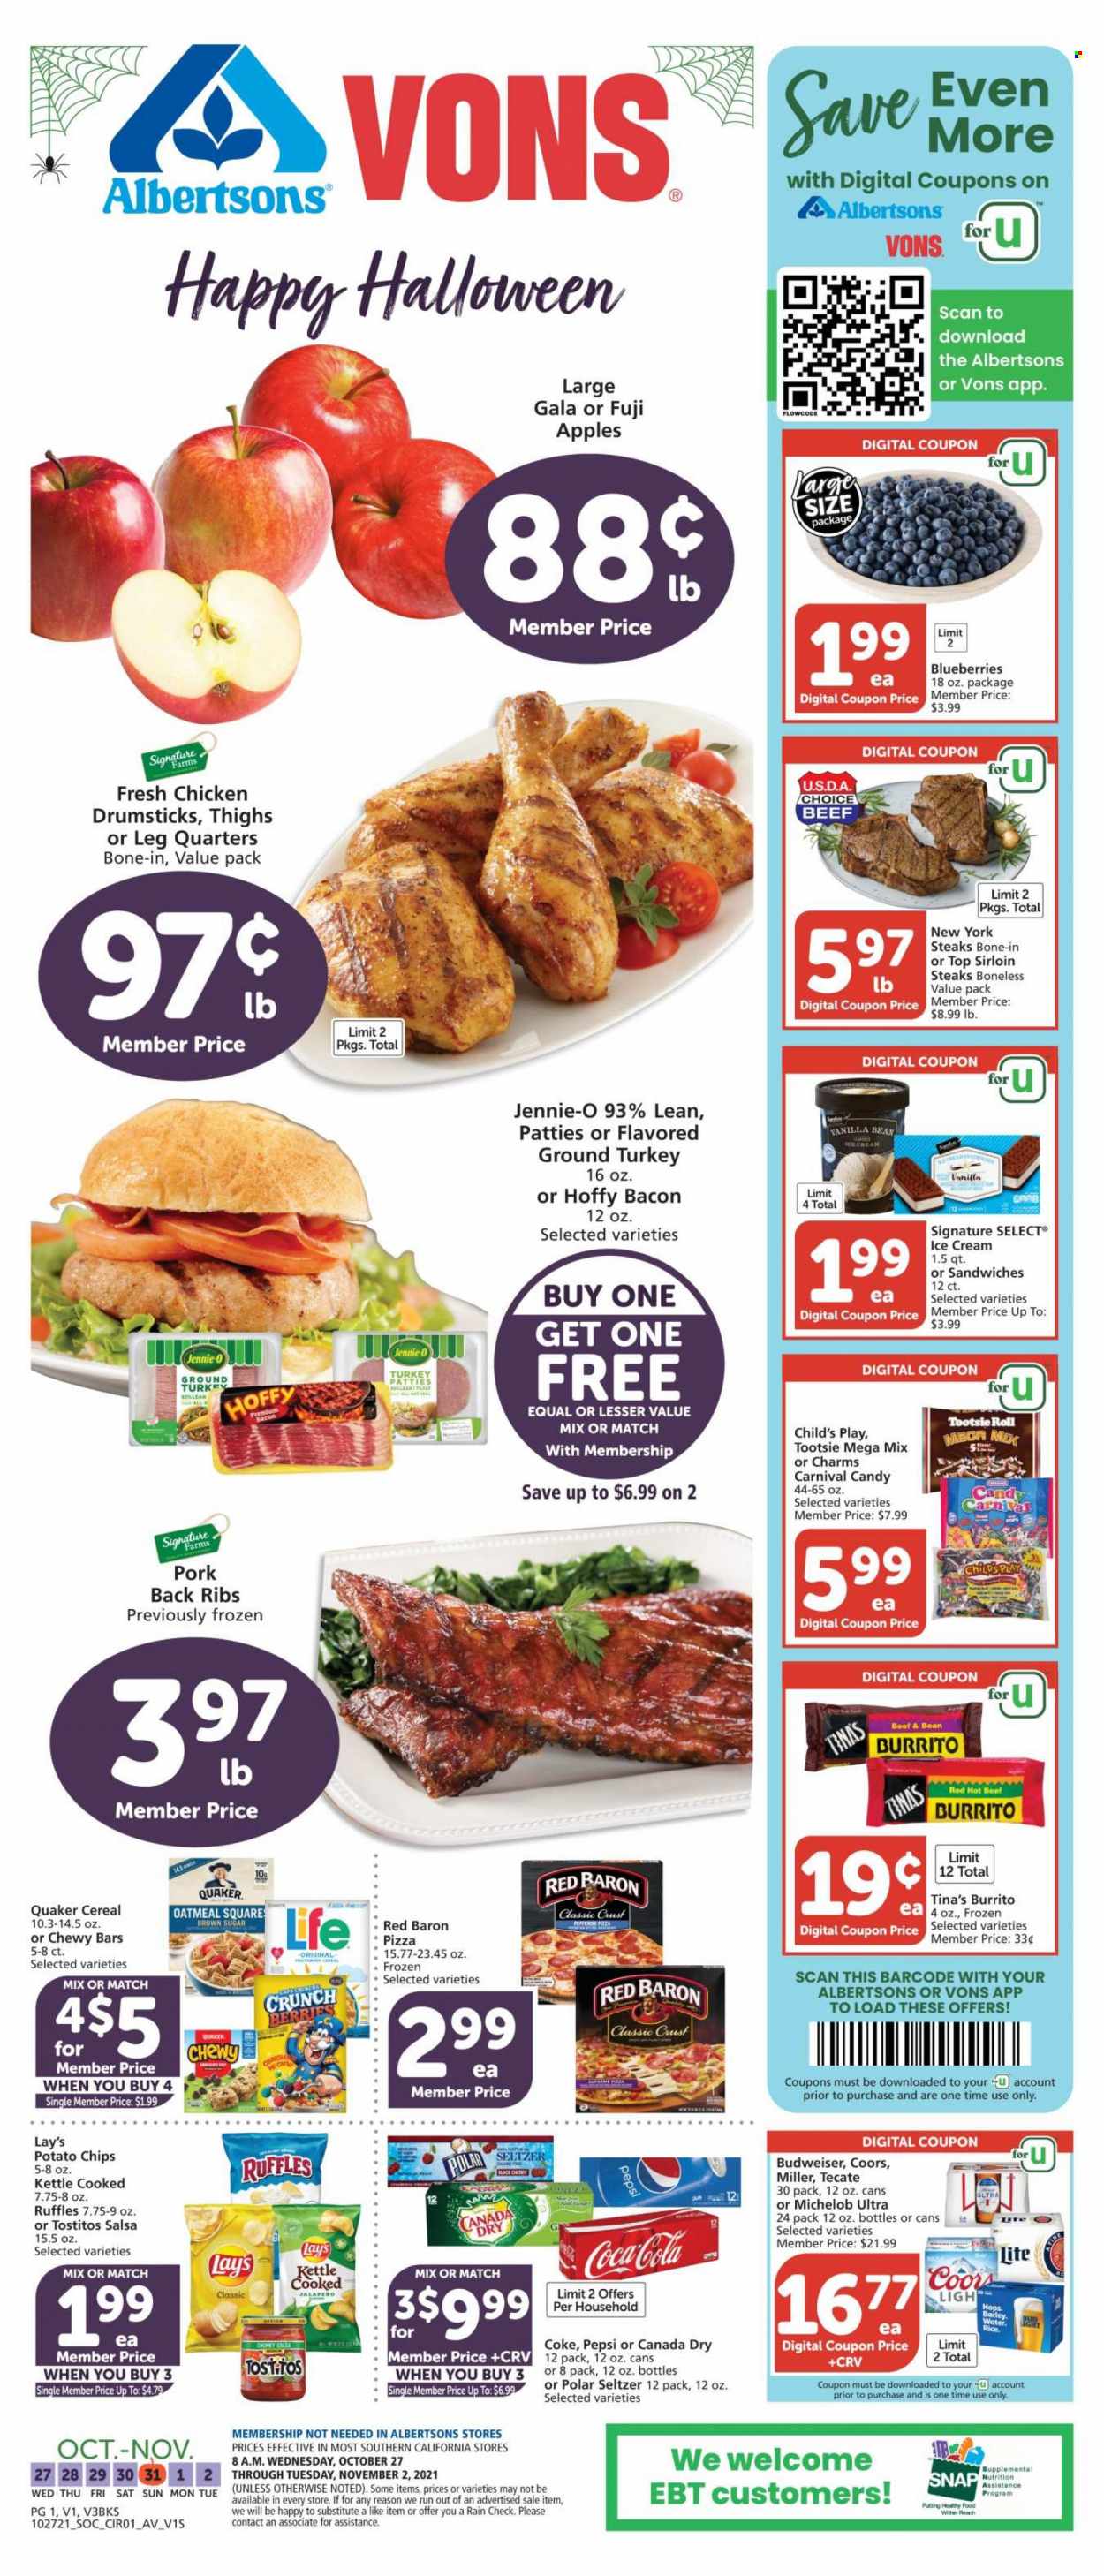 thumbnail - Albertsons Flyer - 10/27/2021 - 11/02/2021 - Sales products - apples, blueberries, Gala, Fuji apple, pizza, sandwich, burrito, Quaker, bacon, feta, ice cream, Red Baron, potato chips, Lay’s, Ruffles, Tostitos, oatmeal, cereals, rice, salsa, Canada Dry, Coca-Cola, Pepsi, seltzer water, beer, Miller, ground turkey, chicken drumsticks, steak, sirloin steak, pork meat, pork ribs, pork back ribs, Halloween, Budweiser, Coors, Michelob. Page 1.